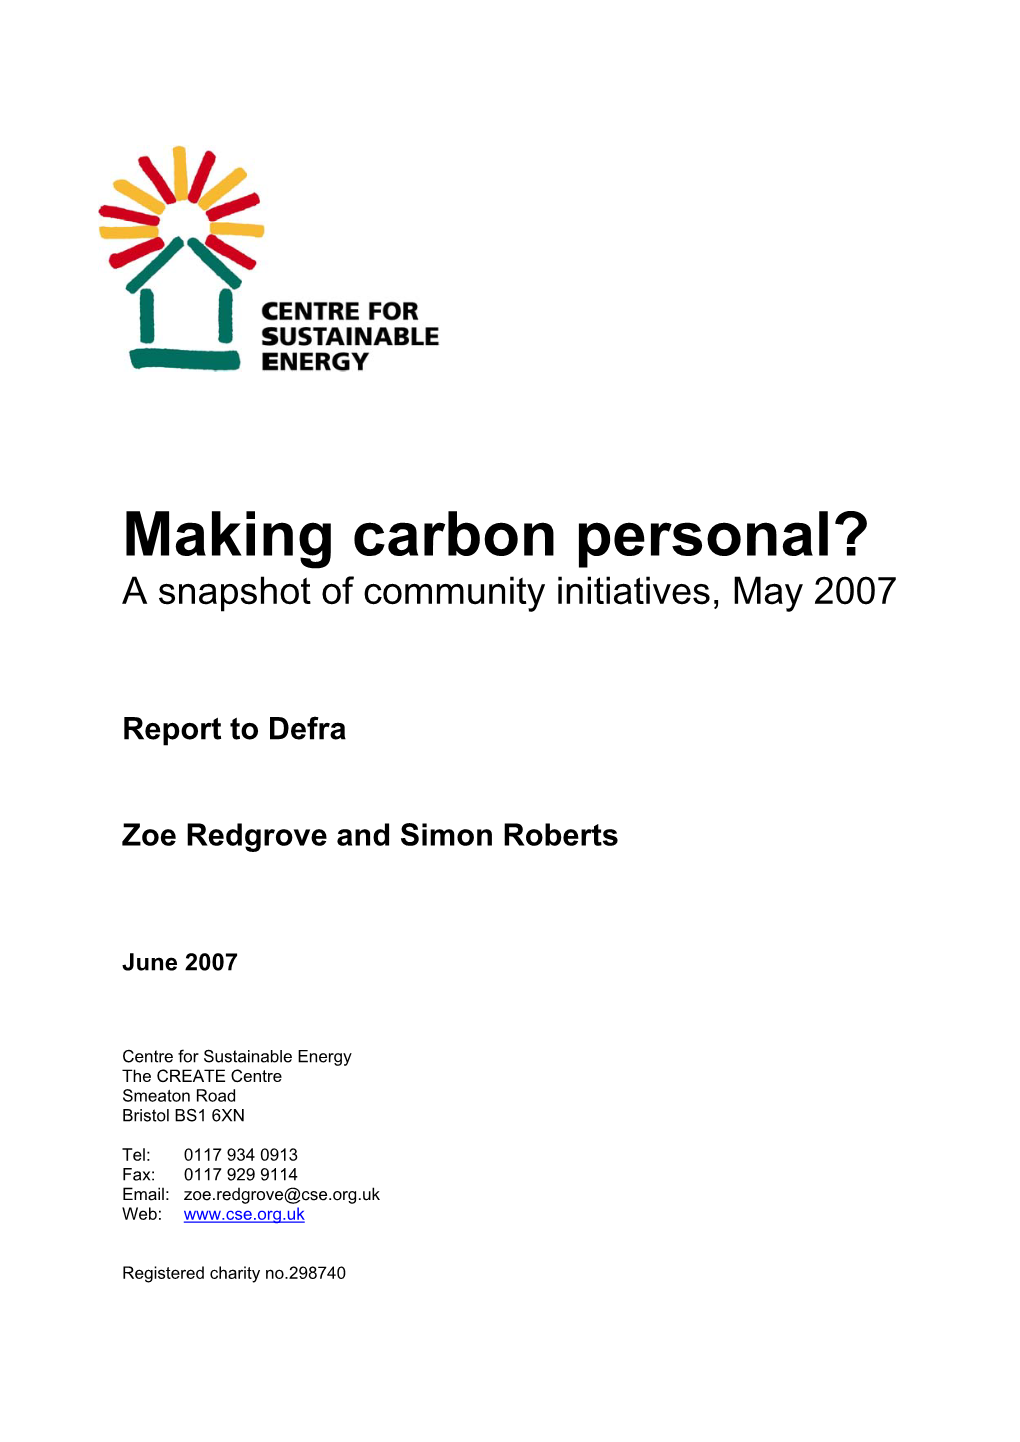 Making Carbon Personal? a Snapshot of Community Initiatives, May 2007